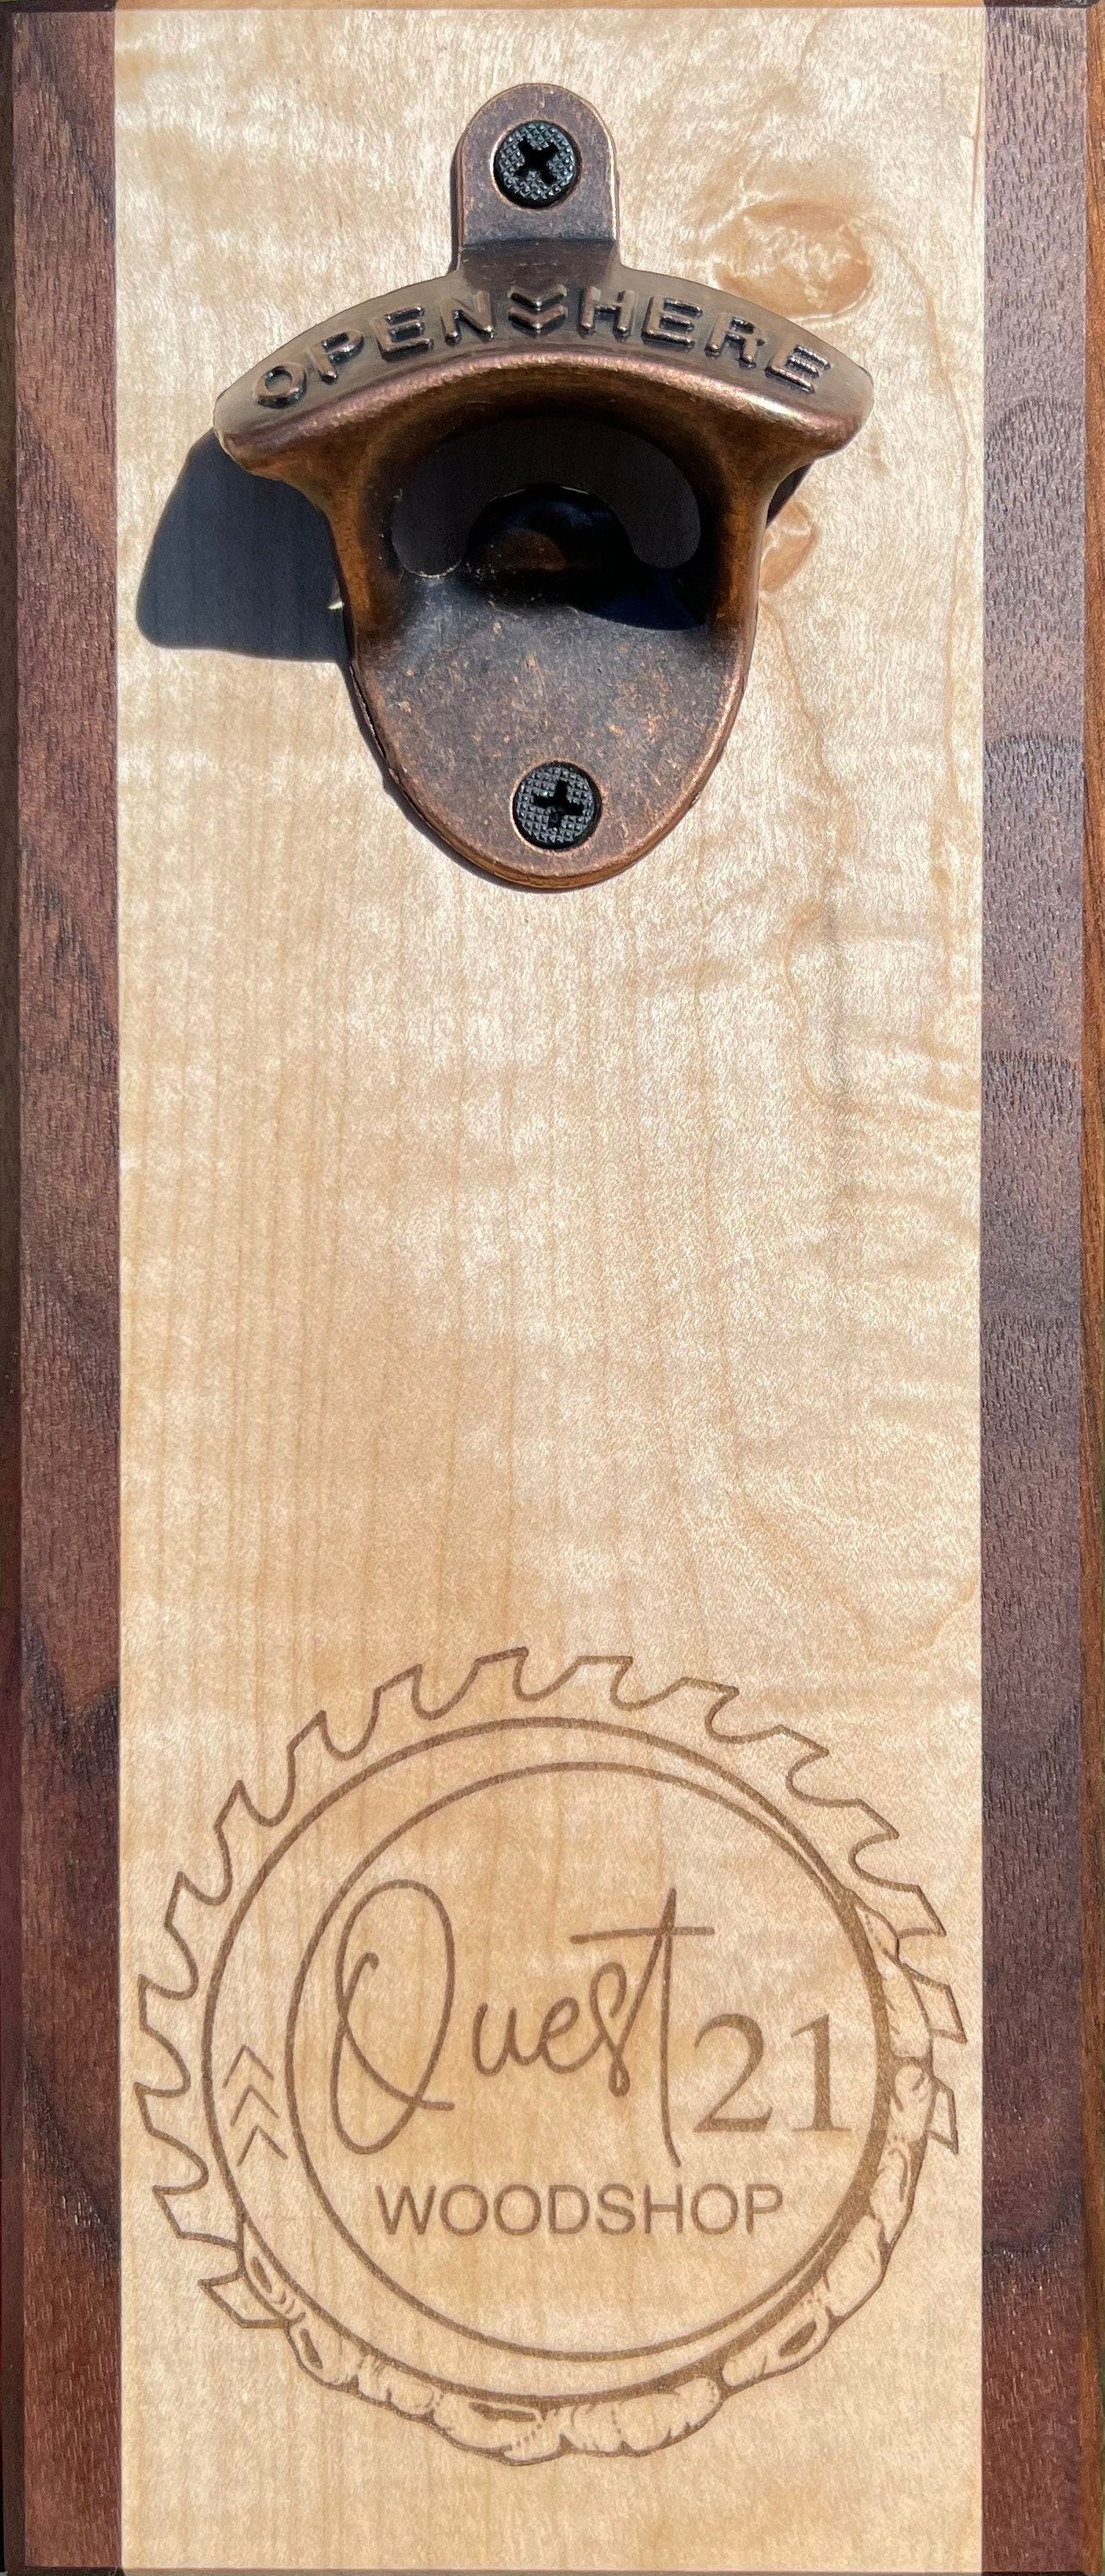 Personalized Bottle opener / gifts / curly maple and walnut bottle opener / magnetic cap catch / laser engraved